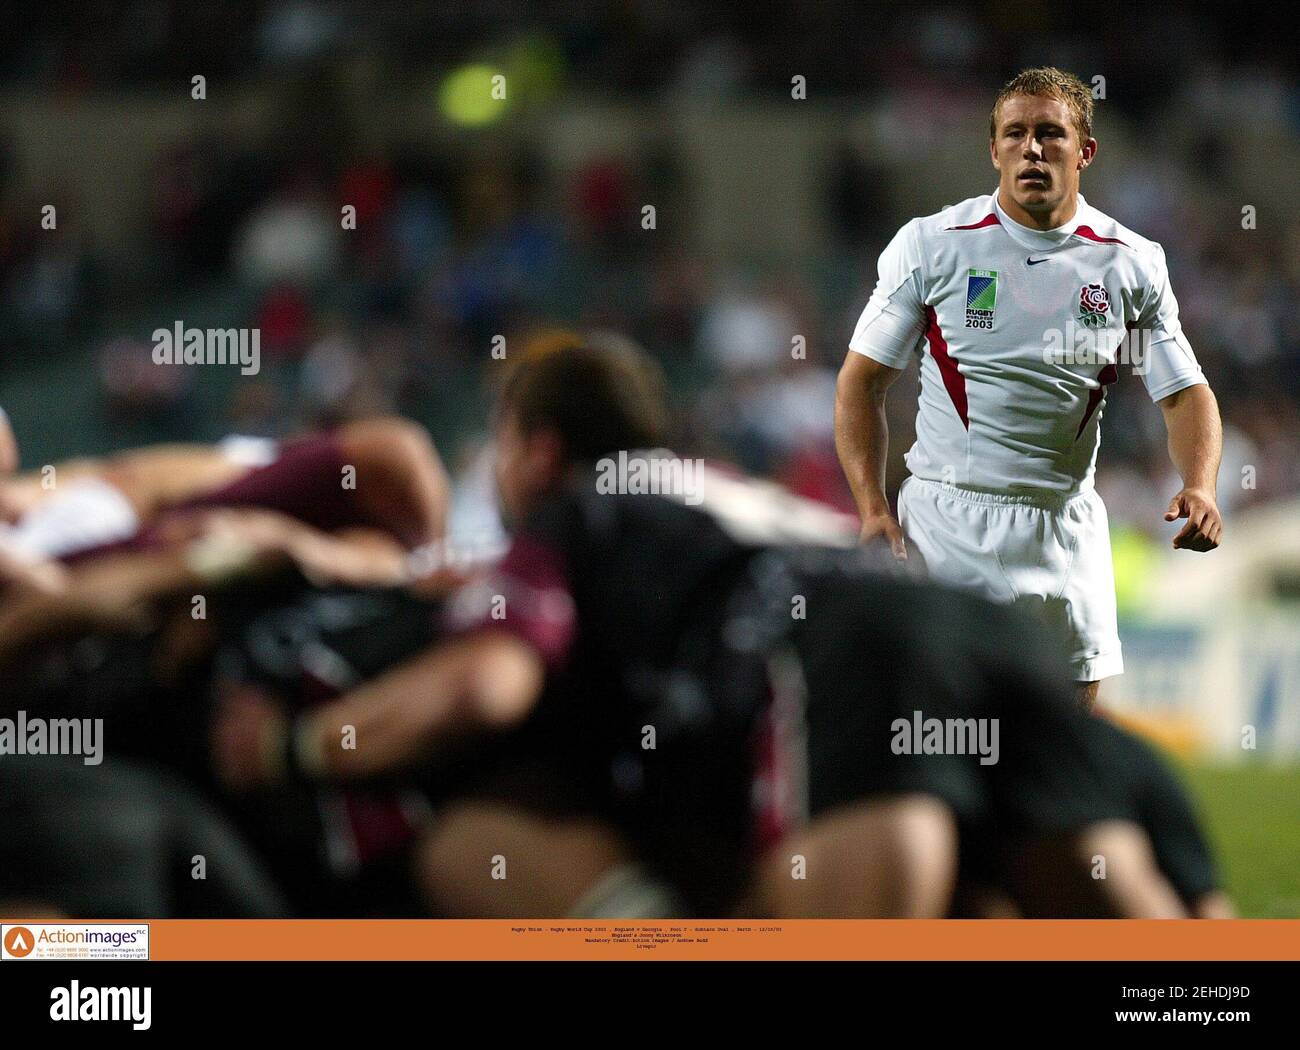 Rugby Union - Rugby World Cup 2003 , England v Georgia , Pool C - Subiaco Oval , Perth - 12/10/03  England's Jonny Wilkinson  Mandatory Credit:Action Images / Andrew Budd  Livepic Stock Photo